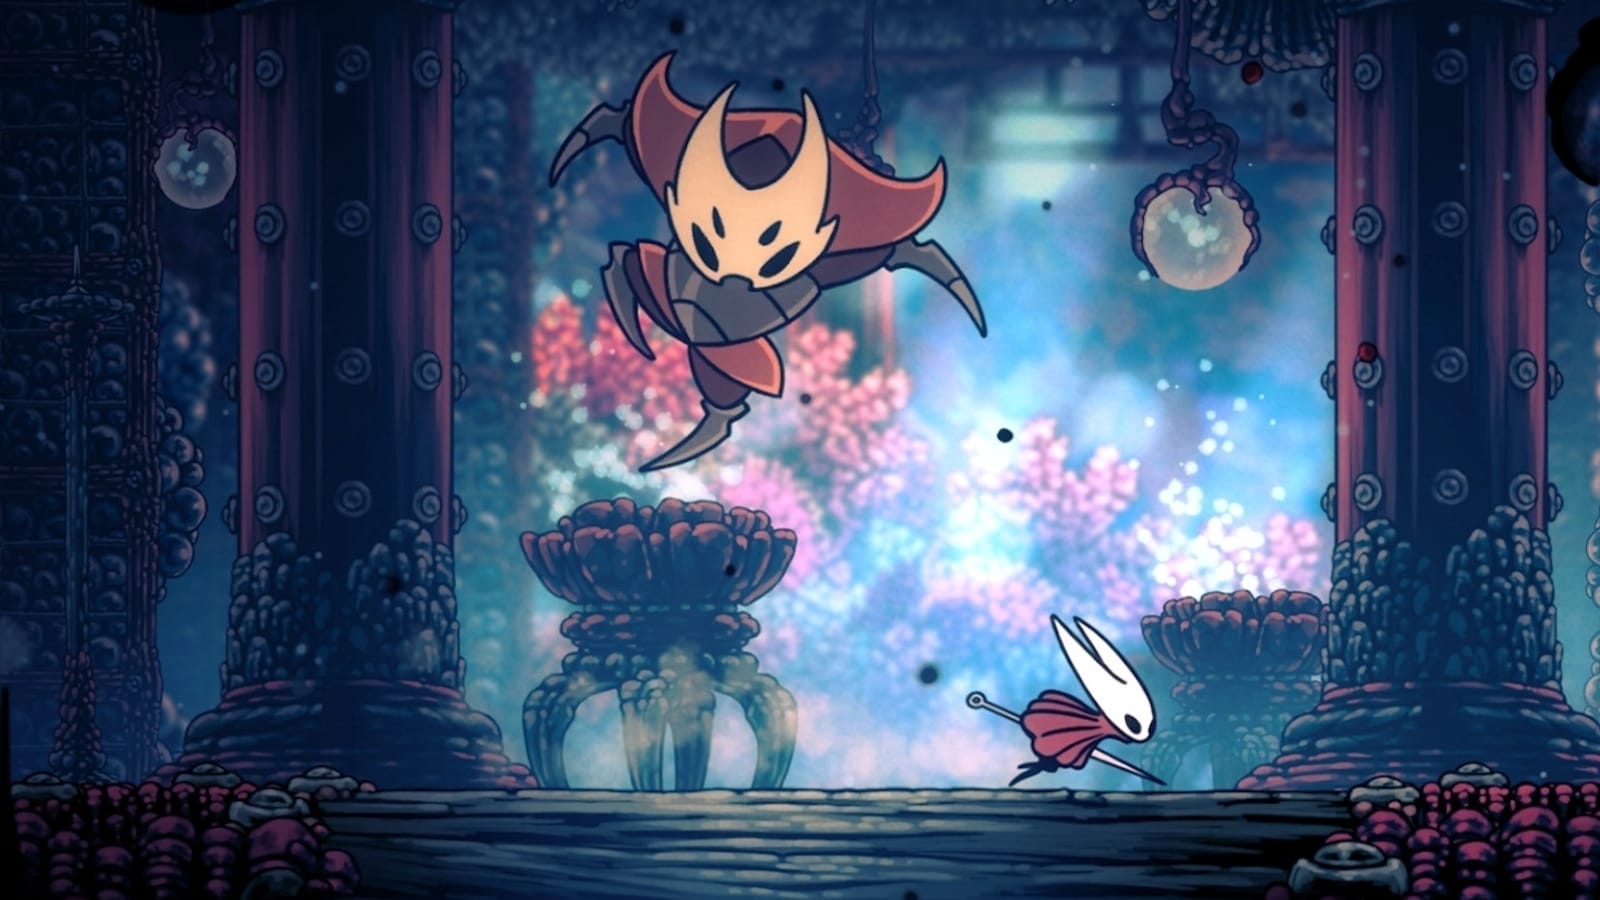 Hollow Knight: Silksong release date may be revealed soon